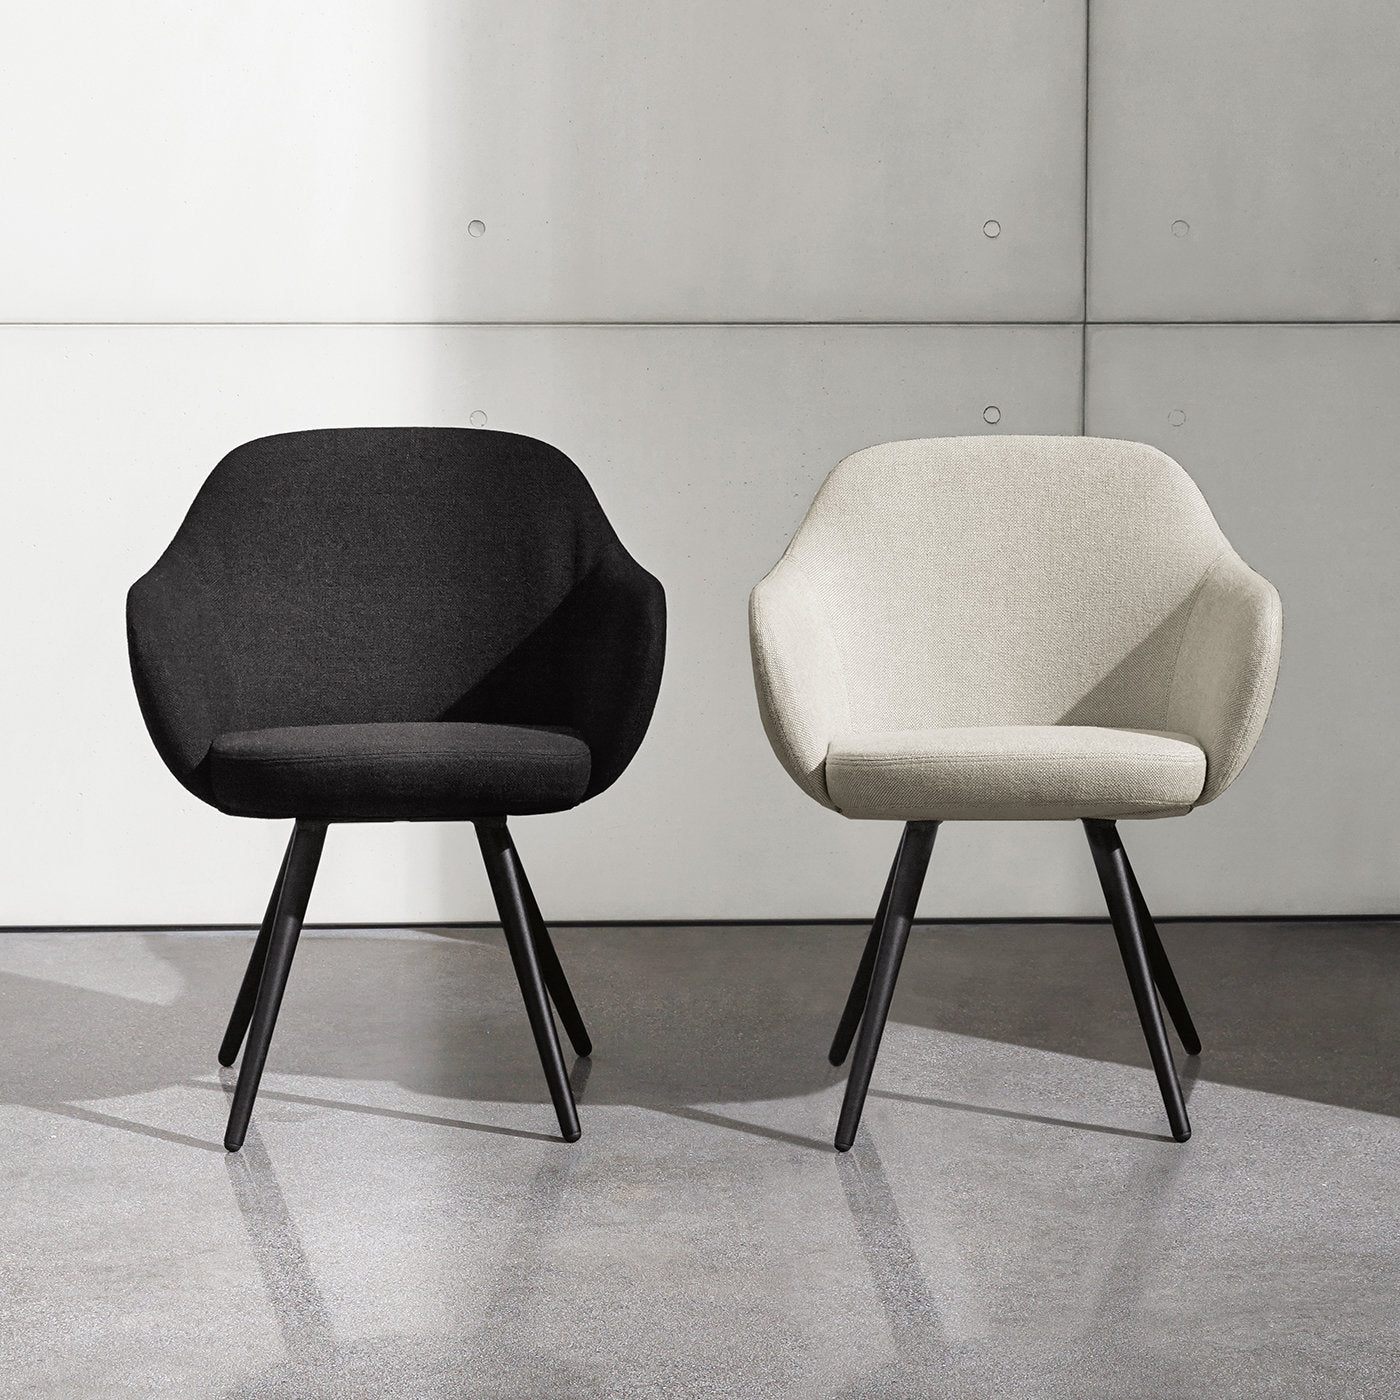 Cadira Cone-Shaped Black Chair with Armrests - Alternative view 1